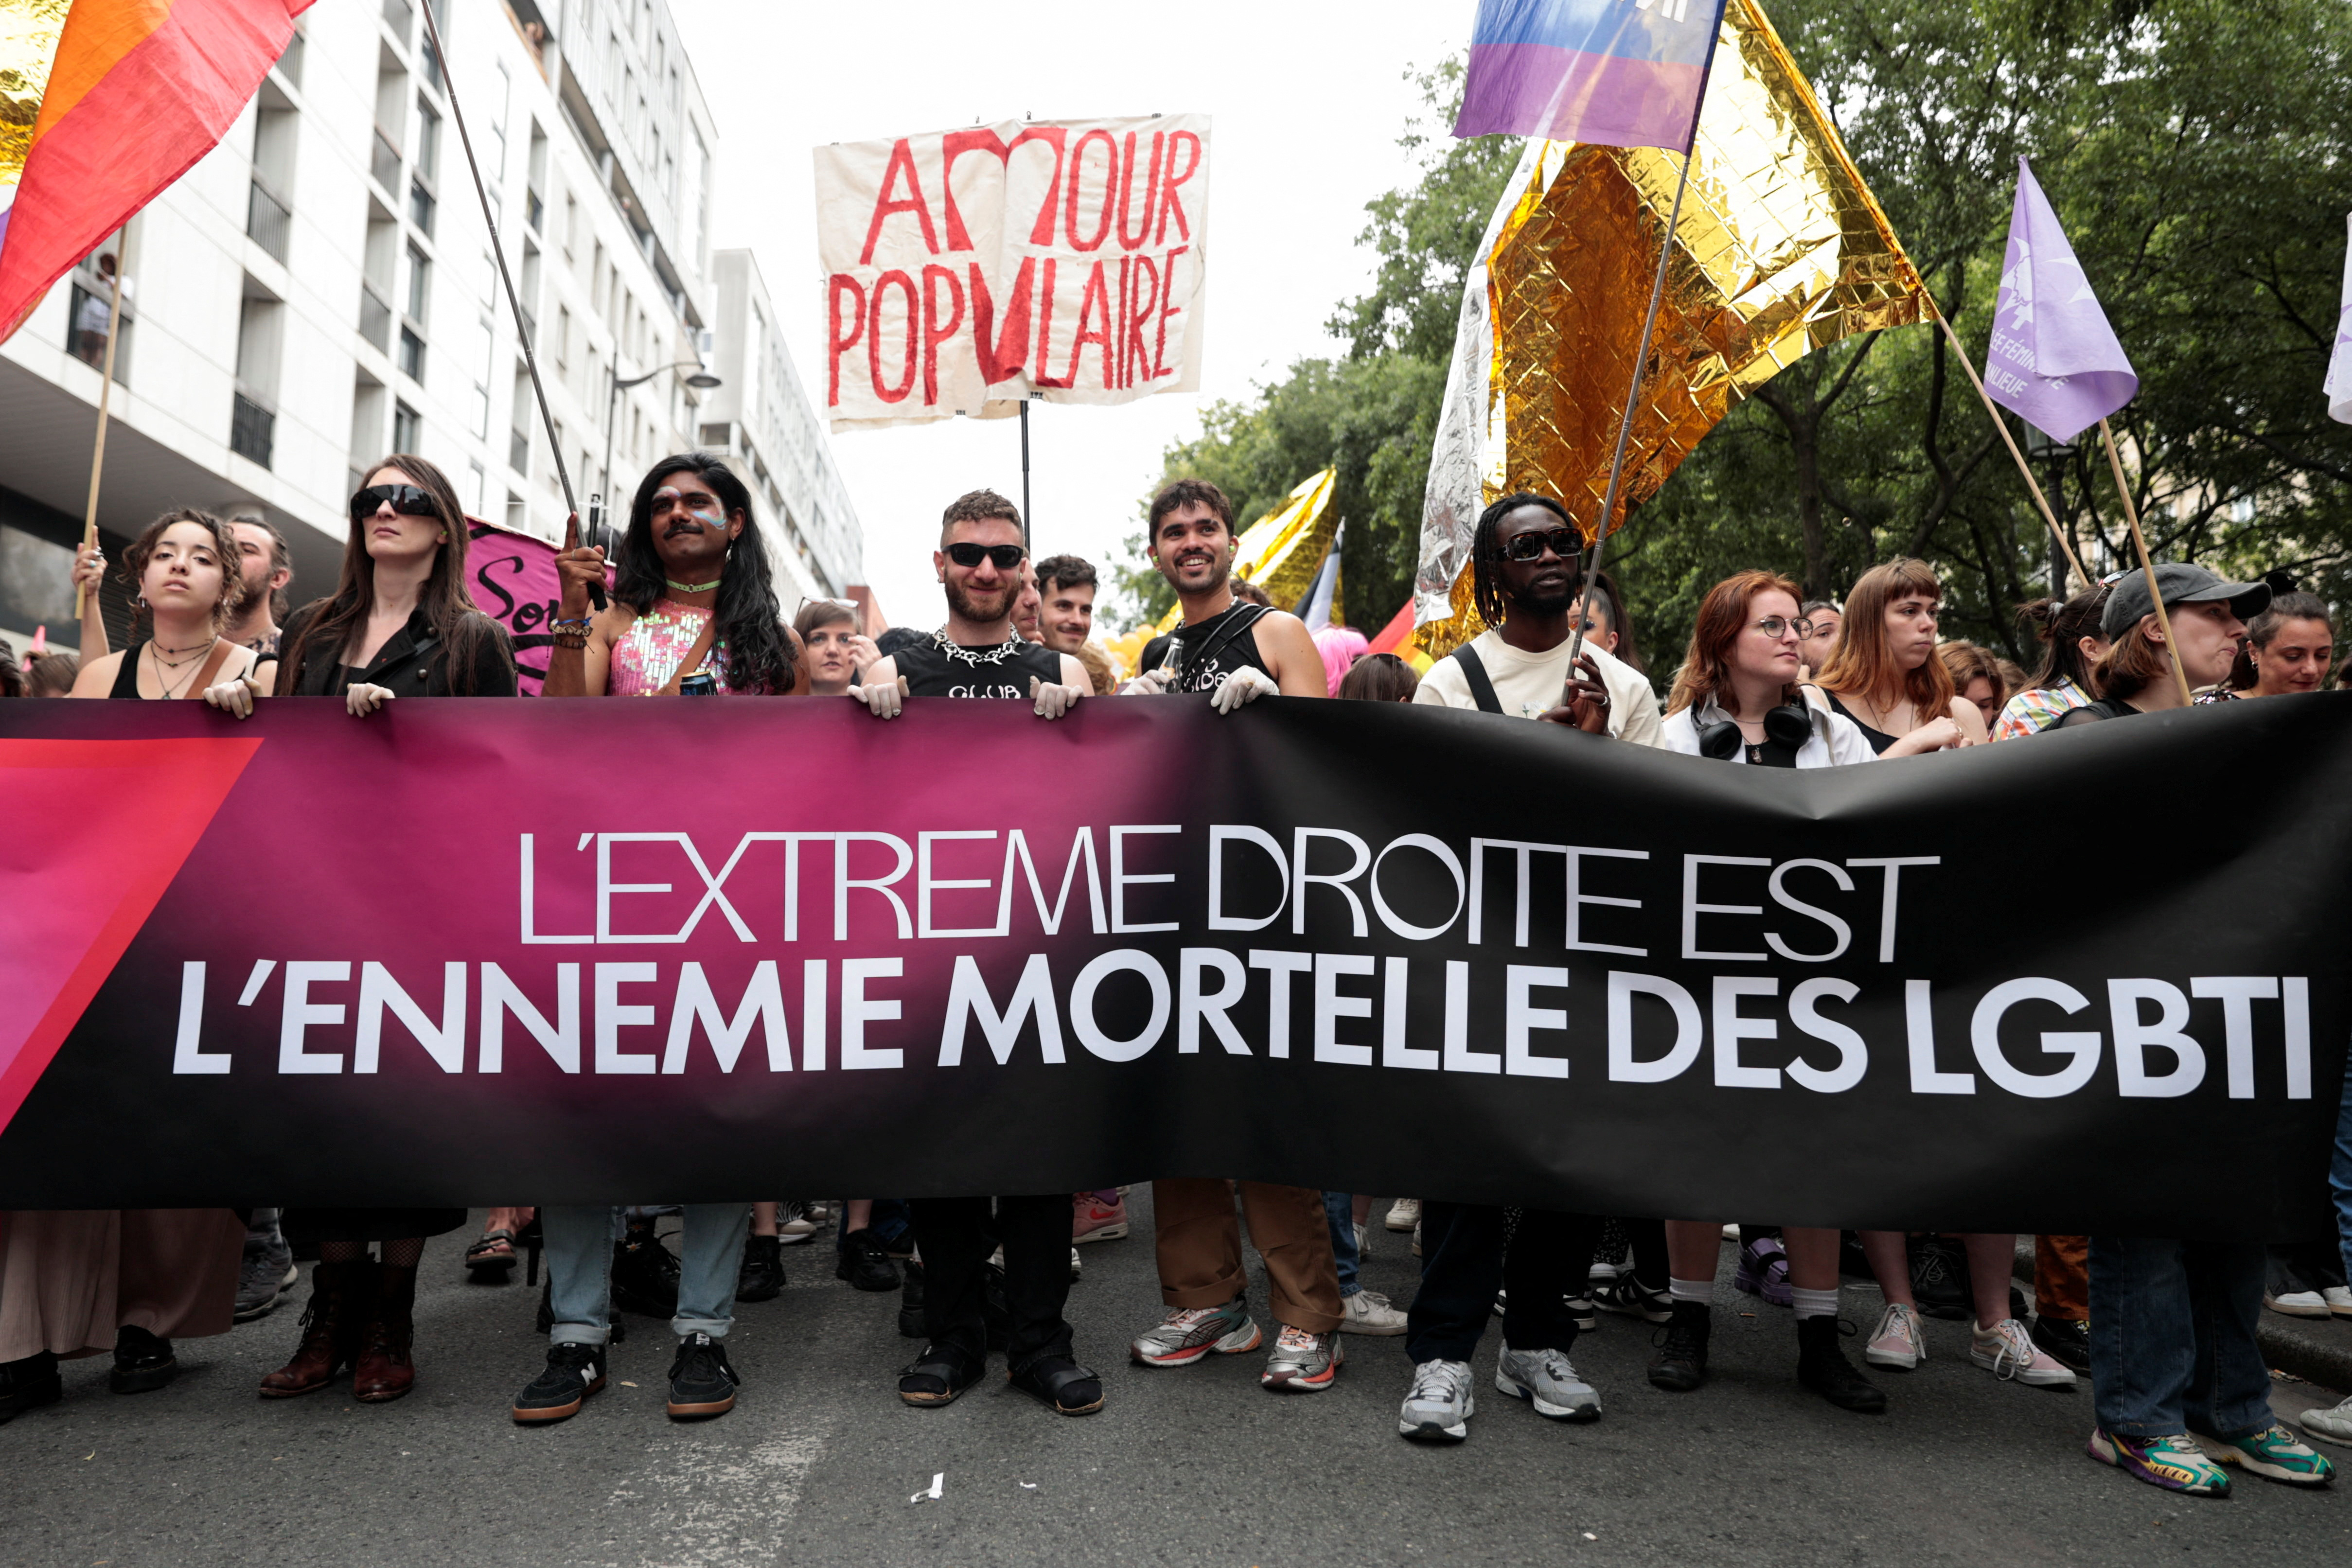 Paris pride march on eve of French elections